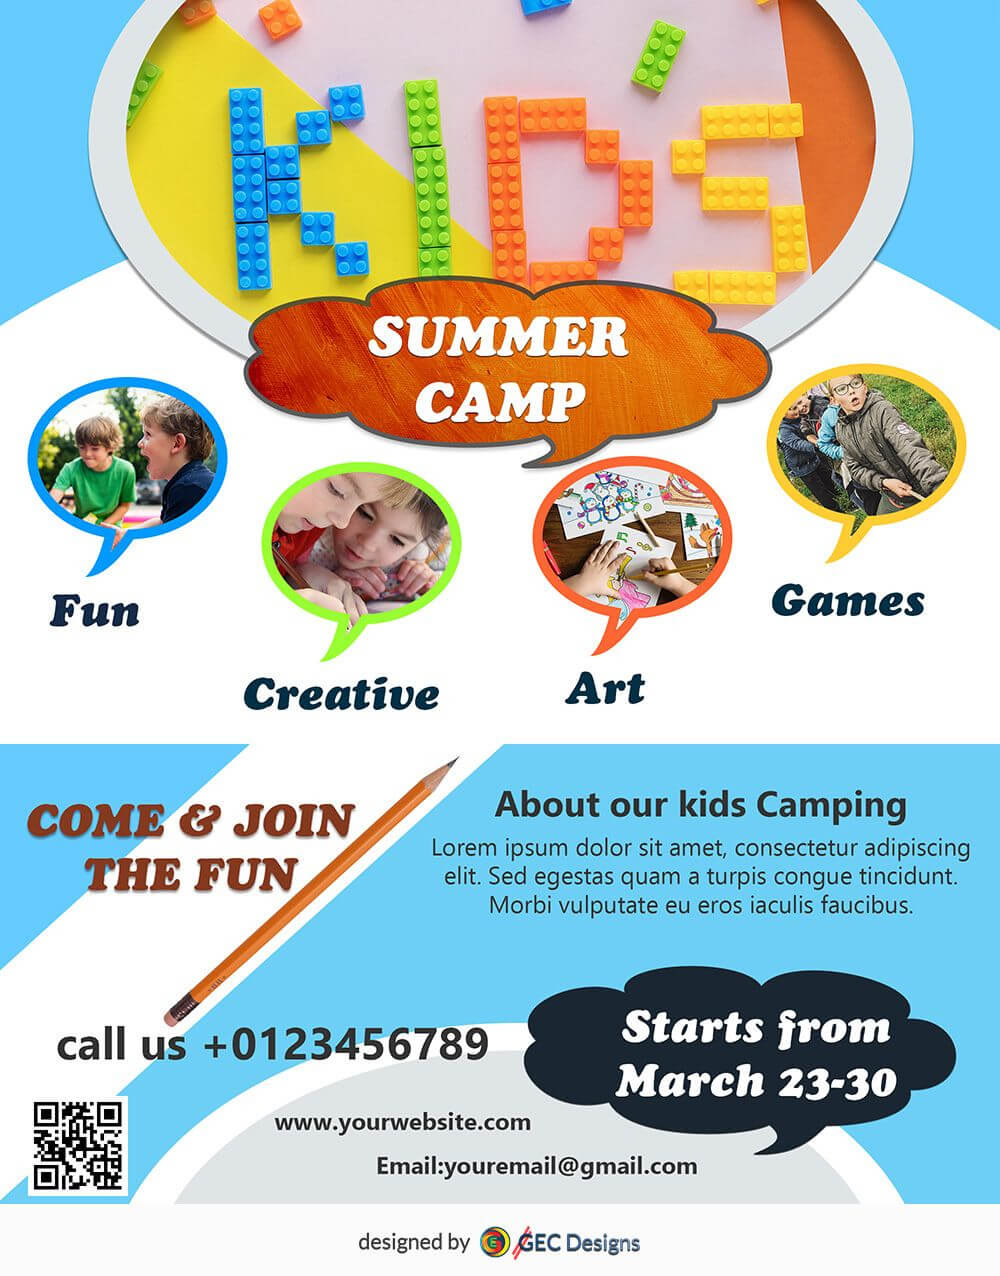 Download Free Flyer Templates | Flyers | Free Flyer Inside Summer Camp Brochure Template Free Download